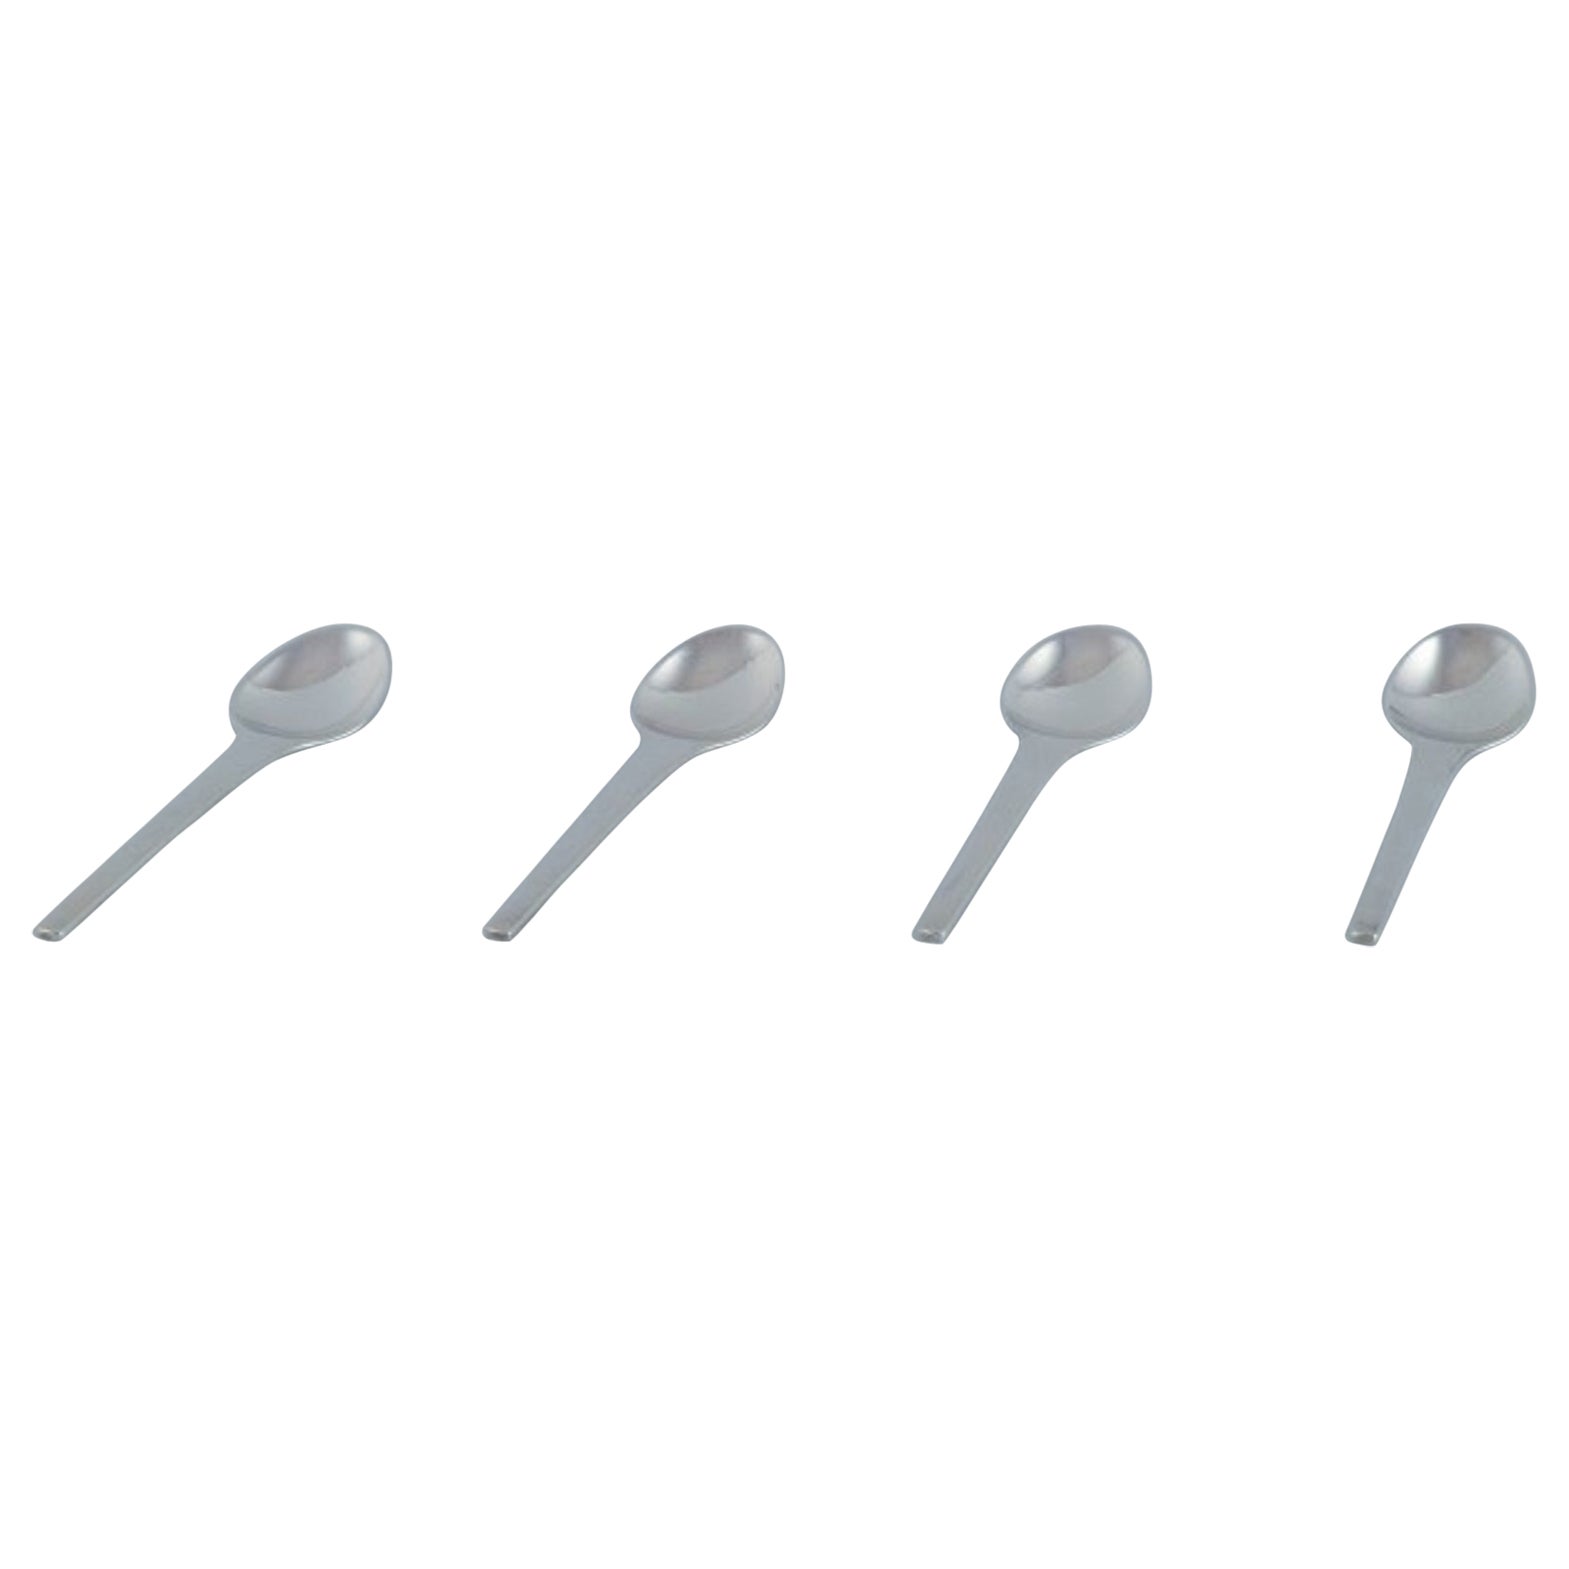 Georg Jensen, Caravel, set of four teaspoons in sterling silver. For Sale